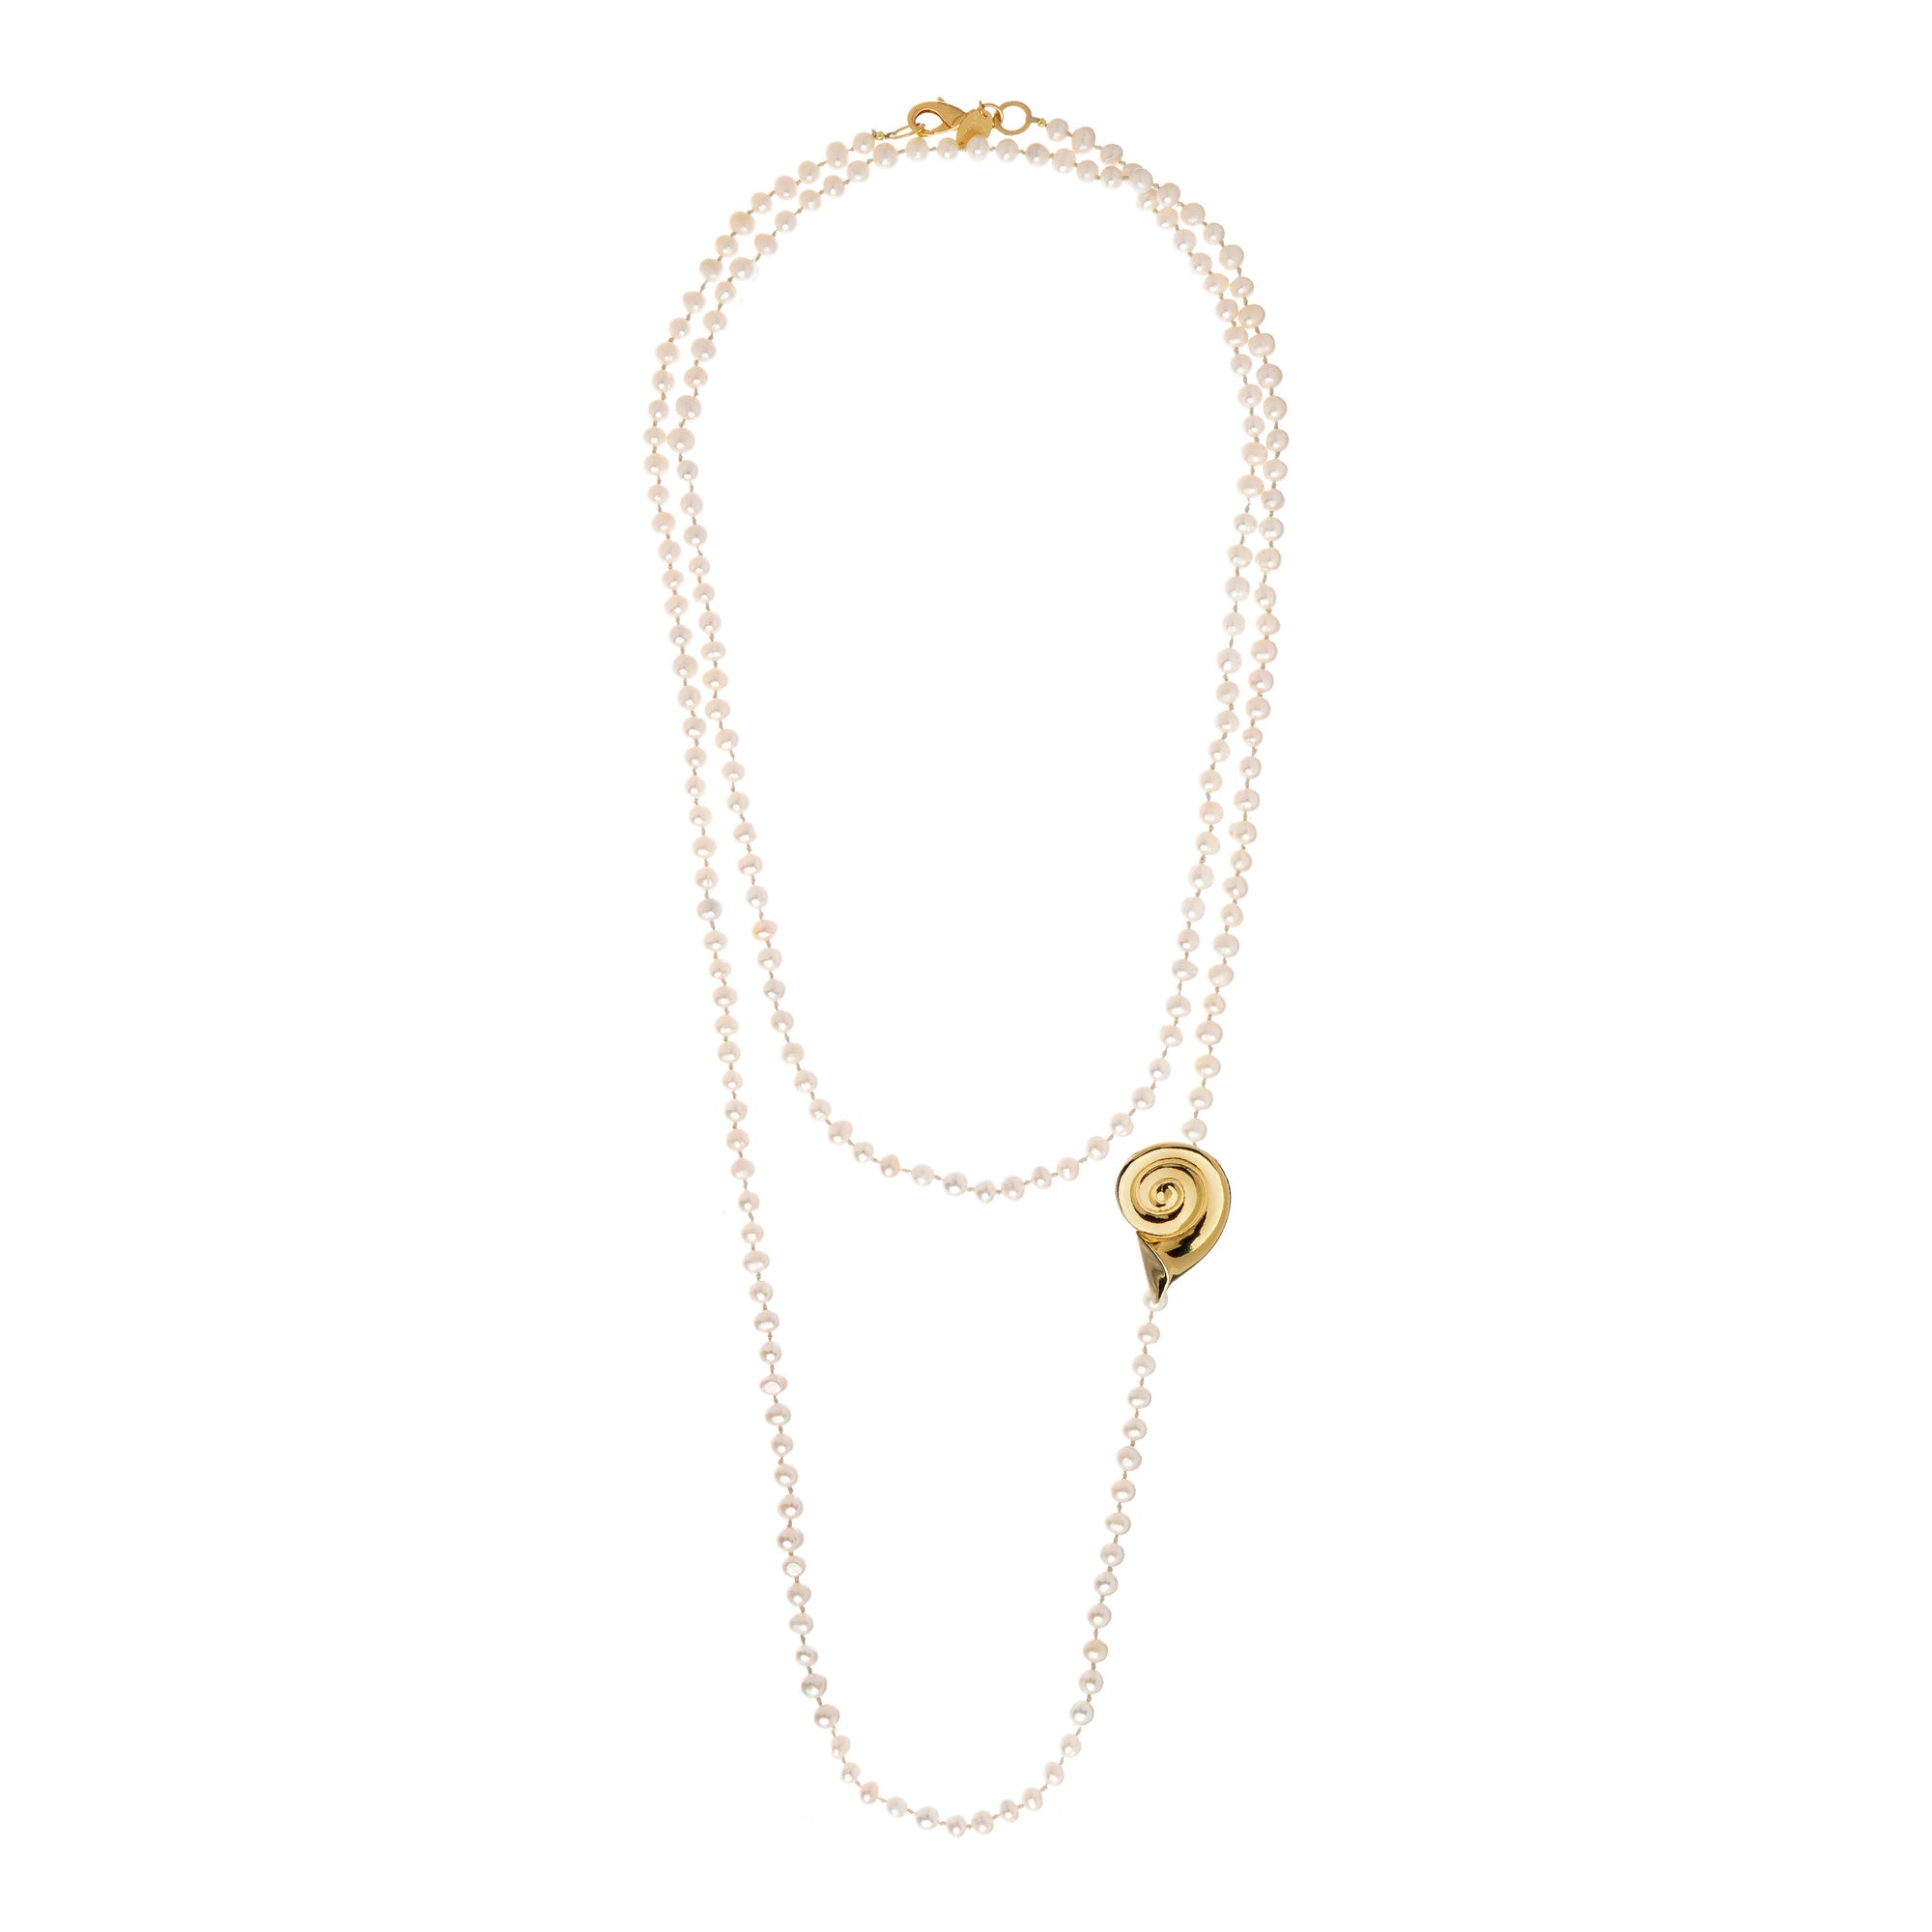 Shell Pearl Long Necklace